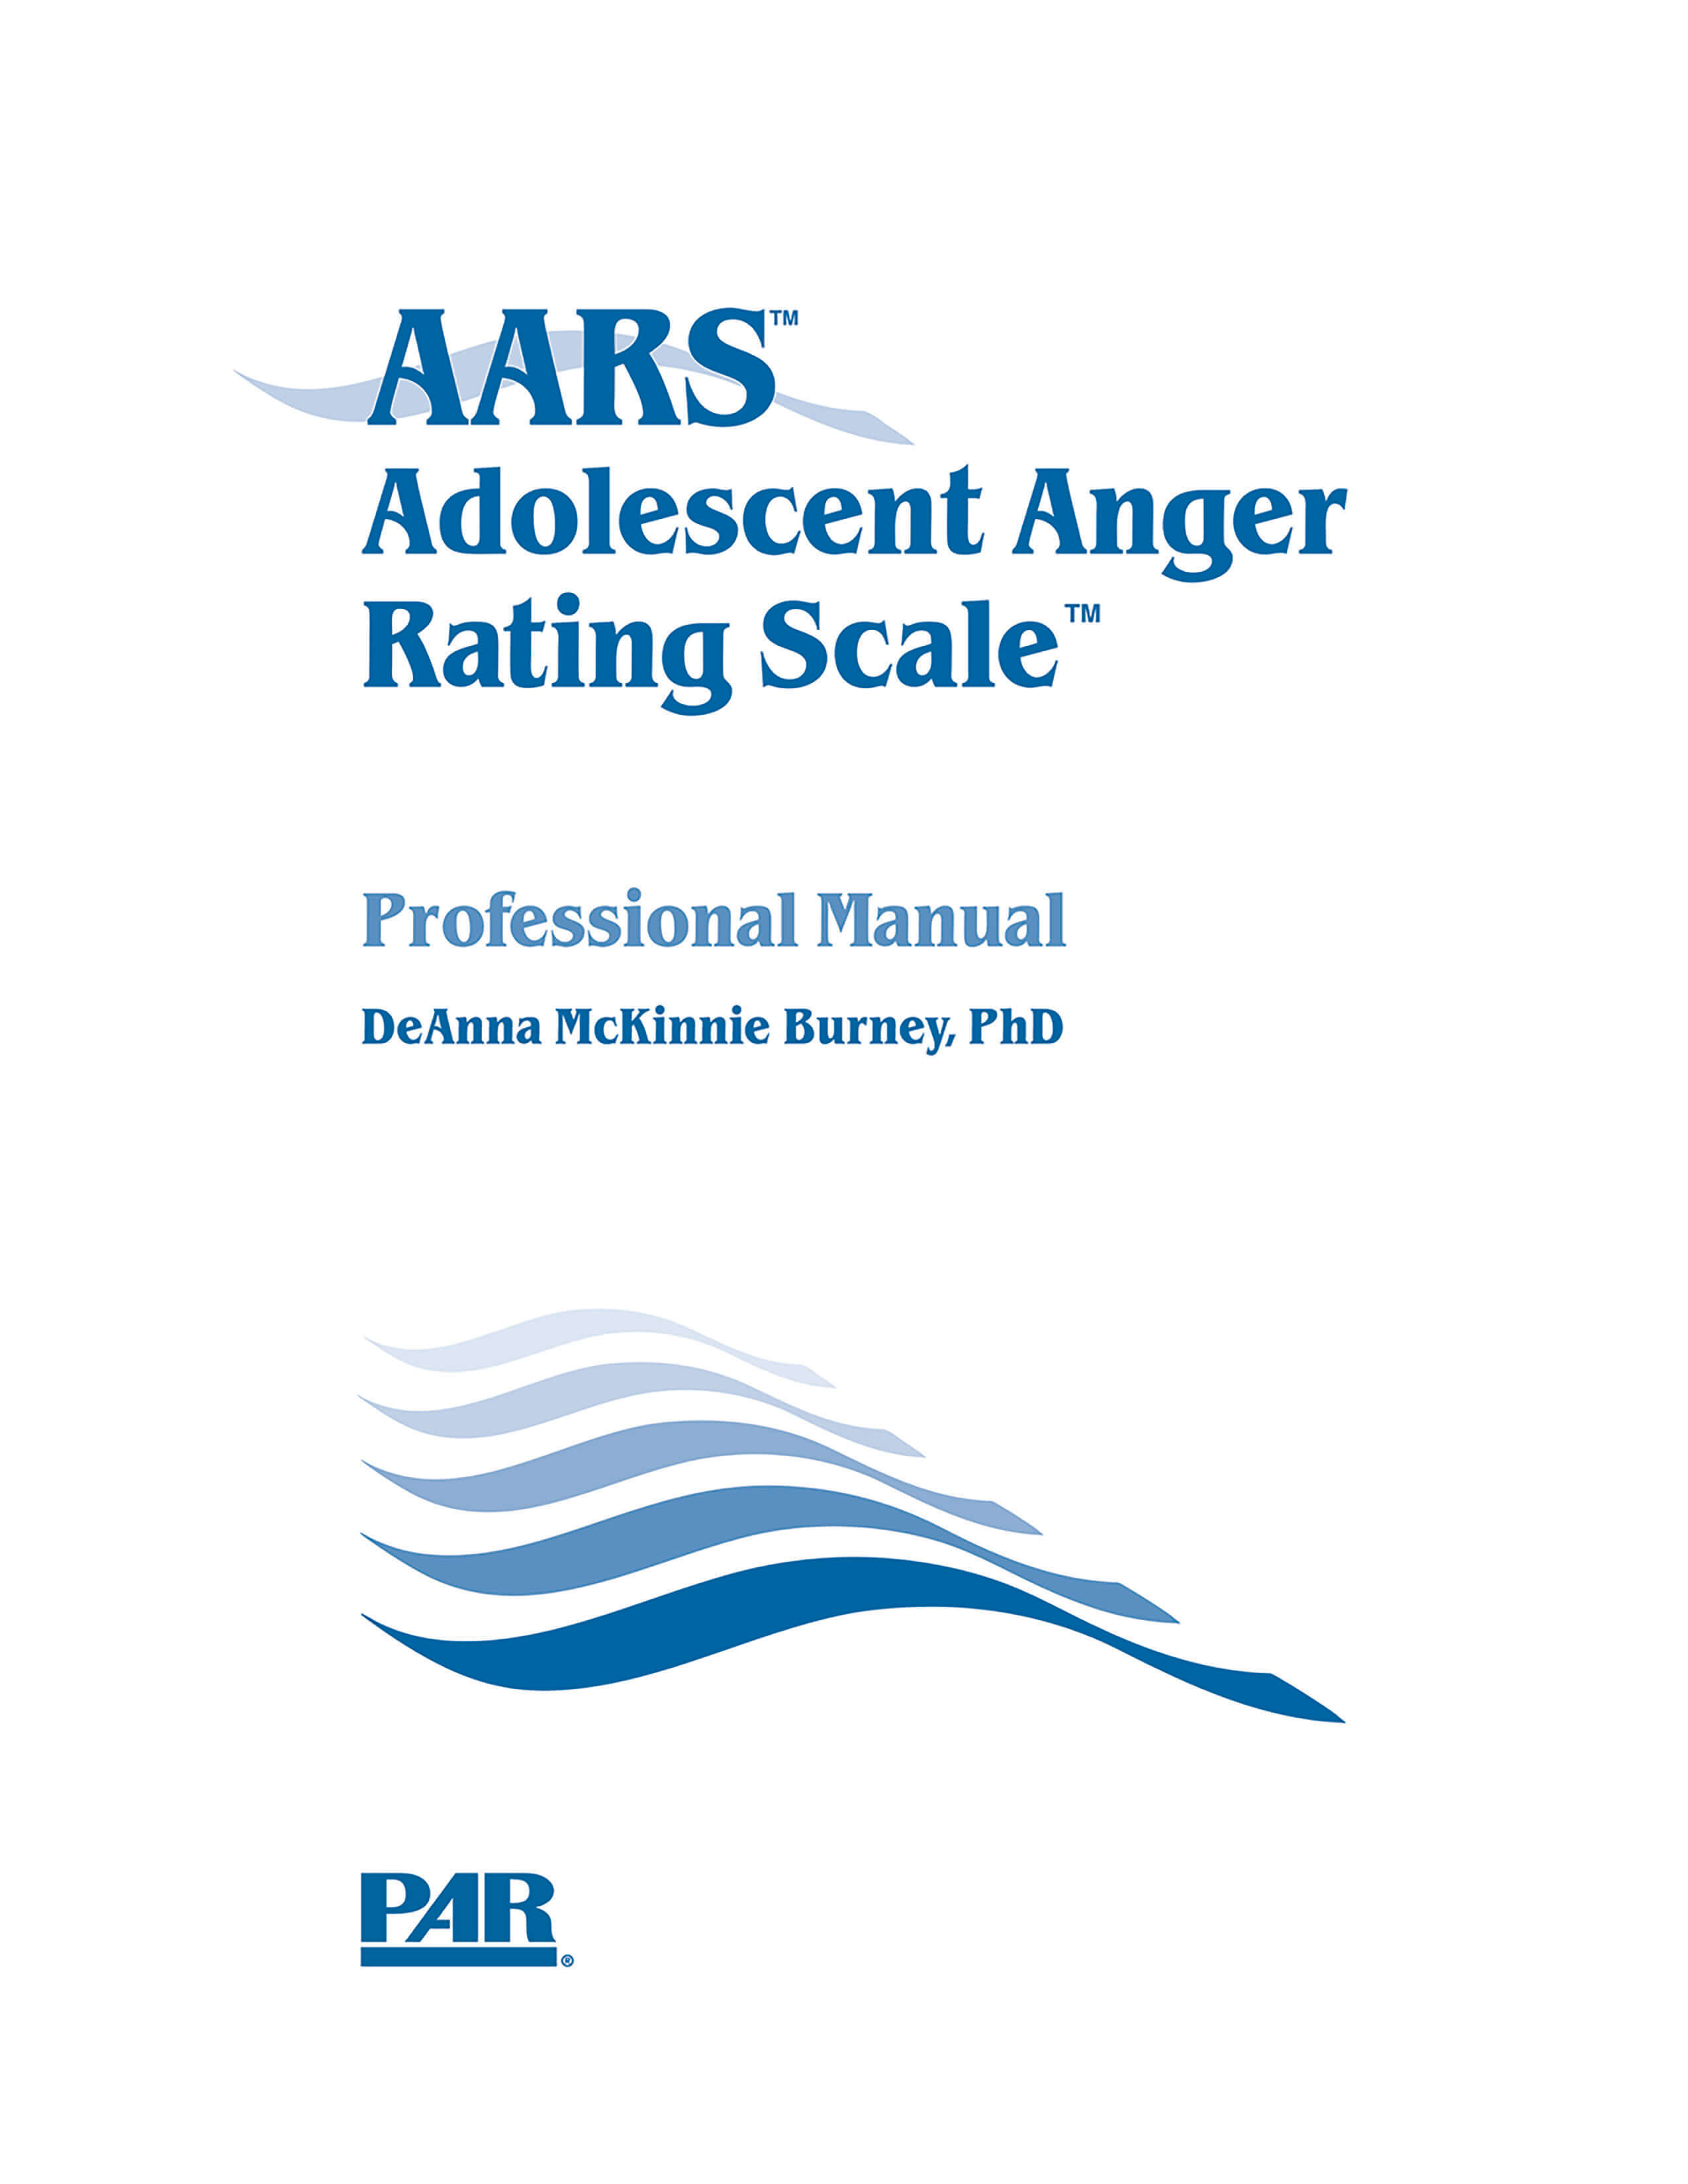 Adolescent Anger Rating Scale™ - 